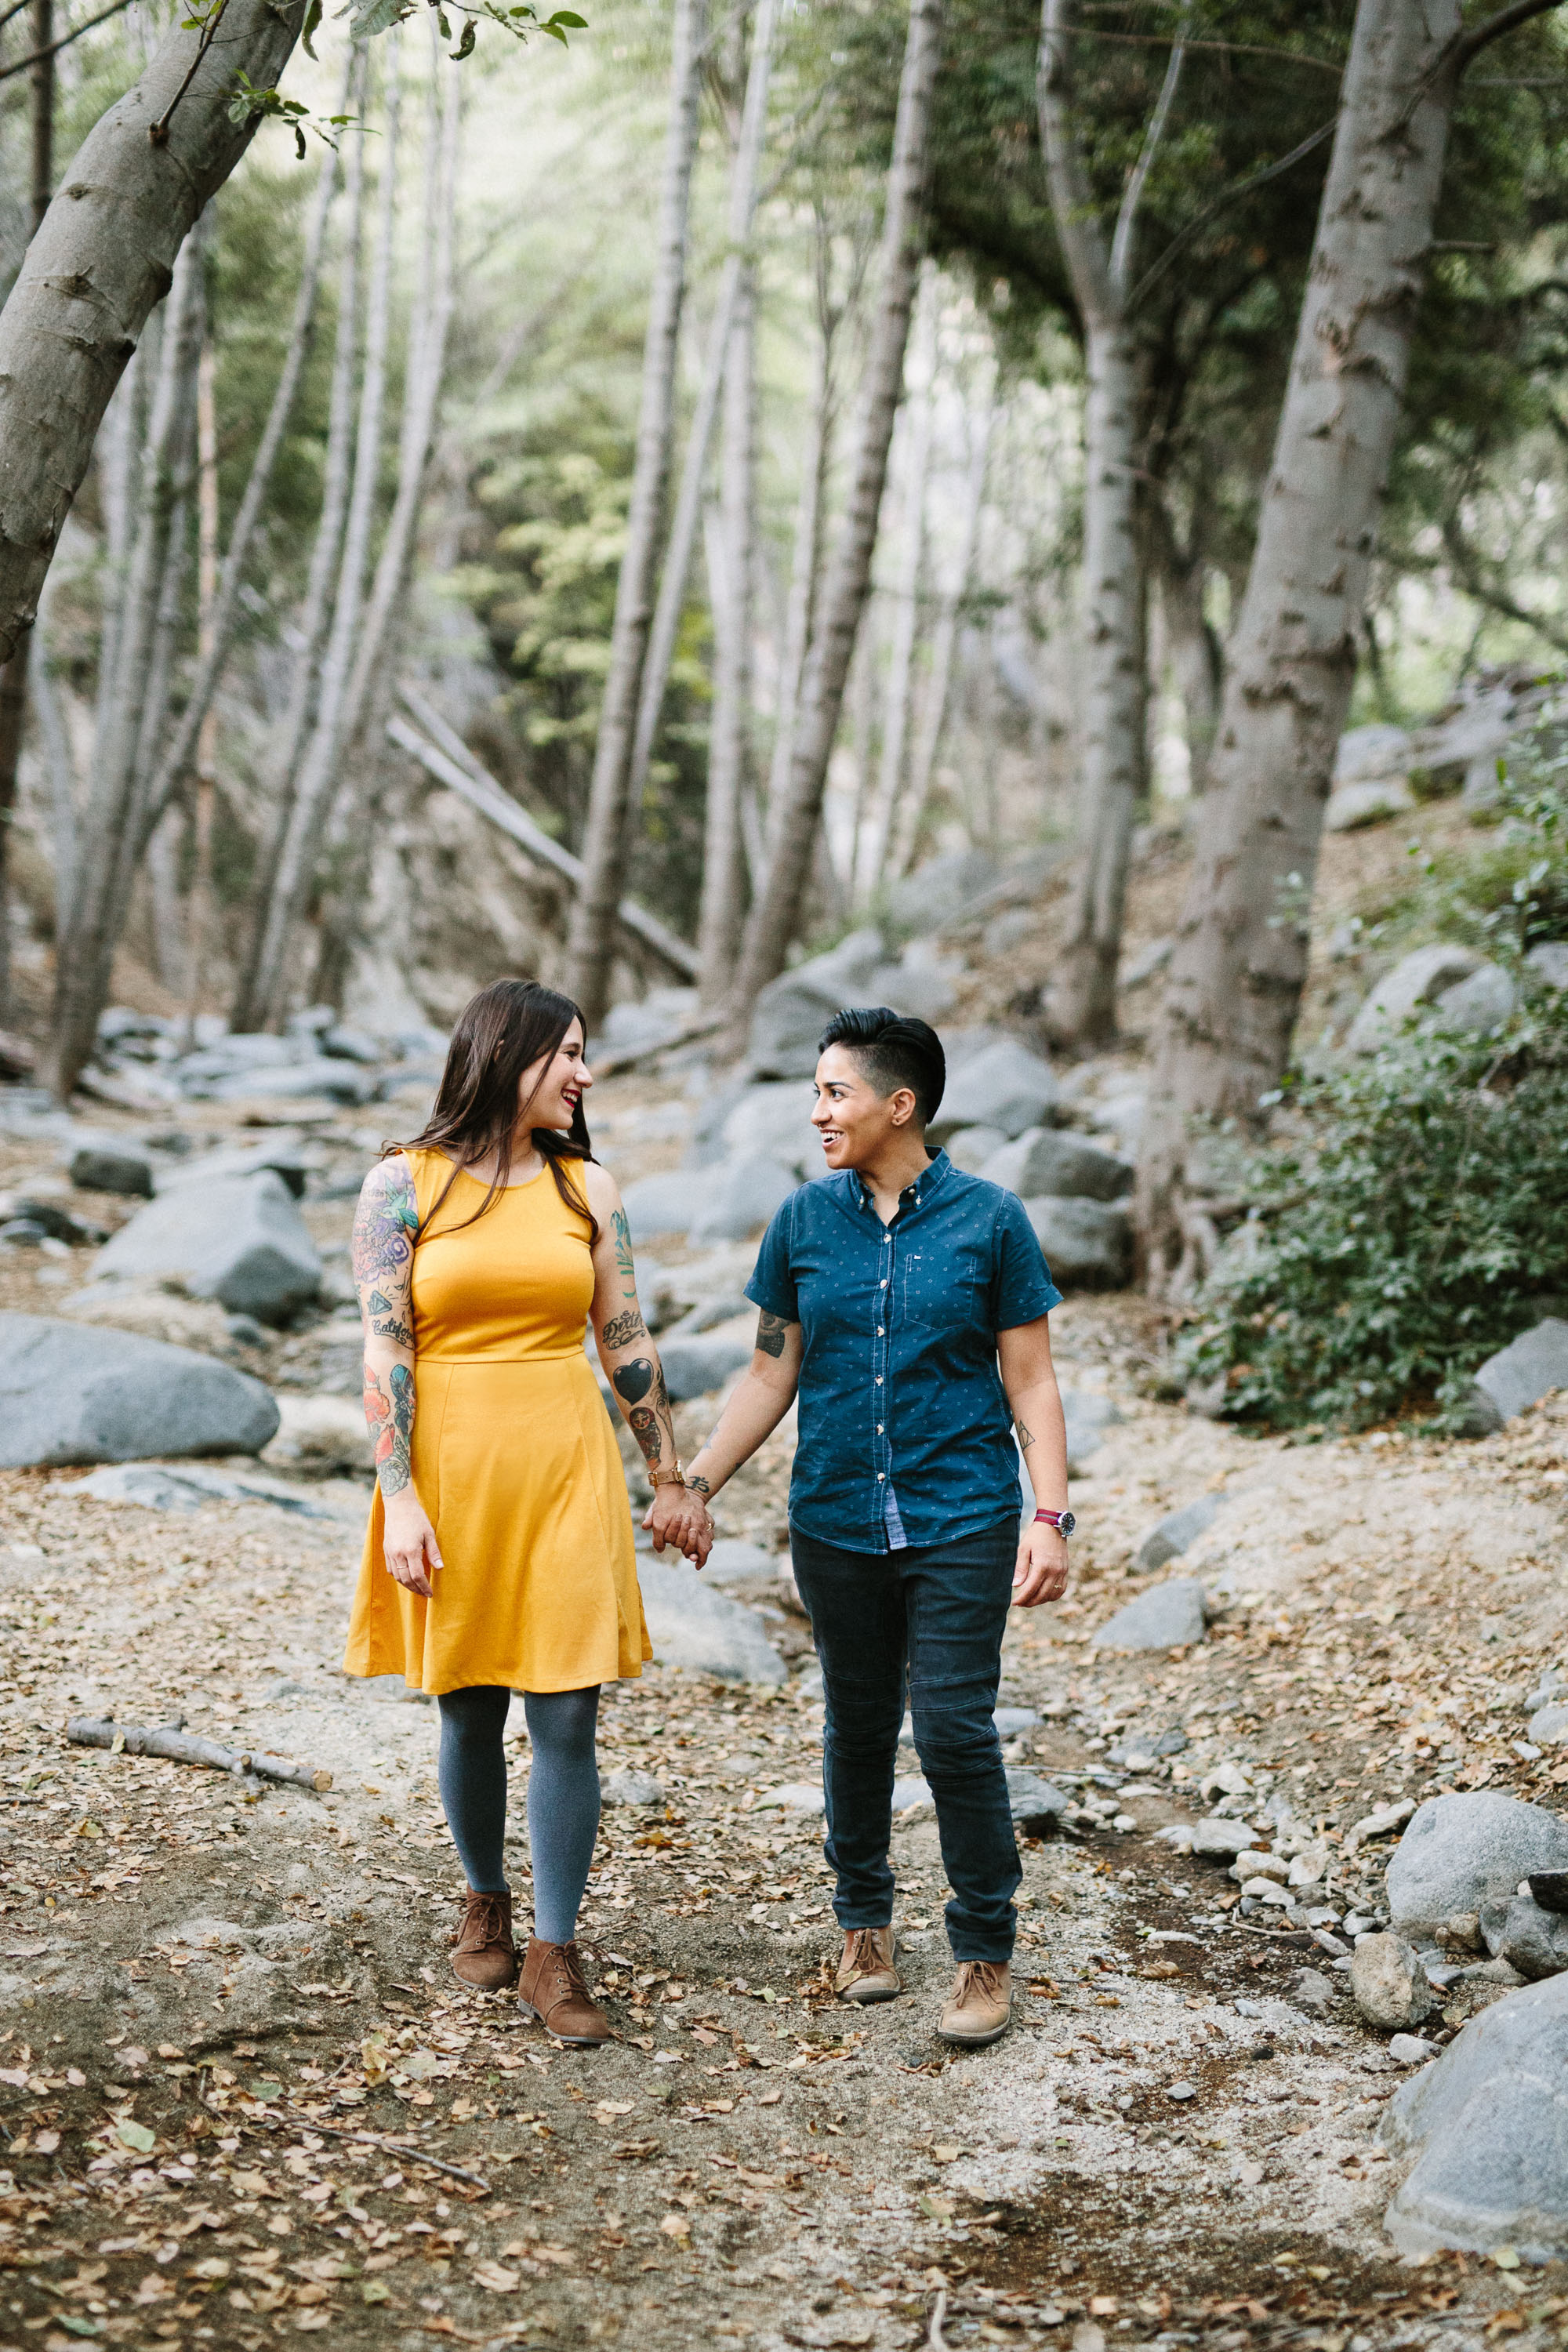 www-marycostaphotography-com-angeles-national-forest-engagement-0013